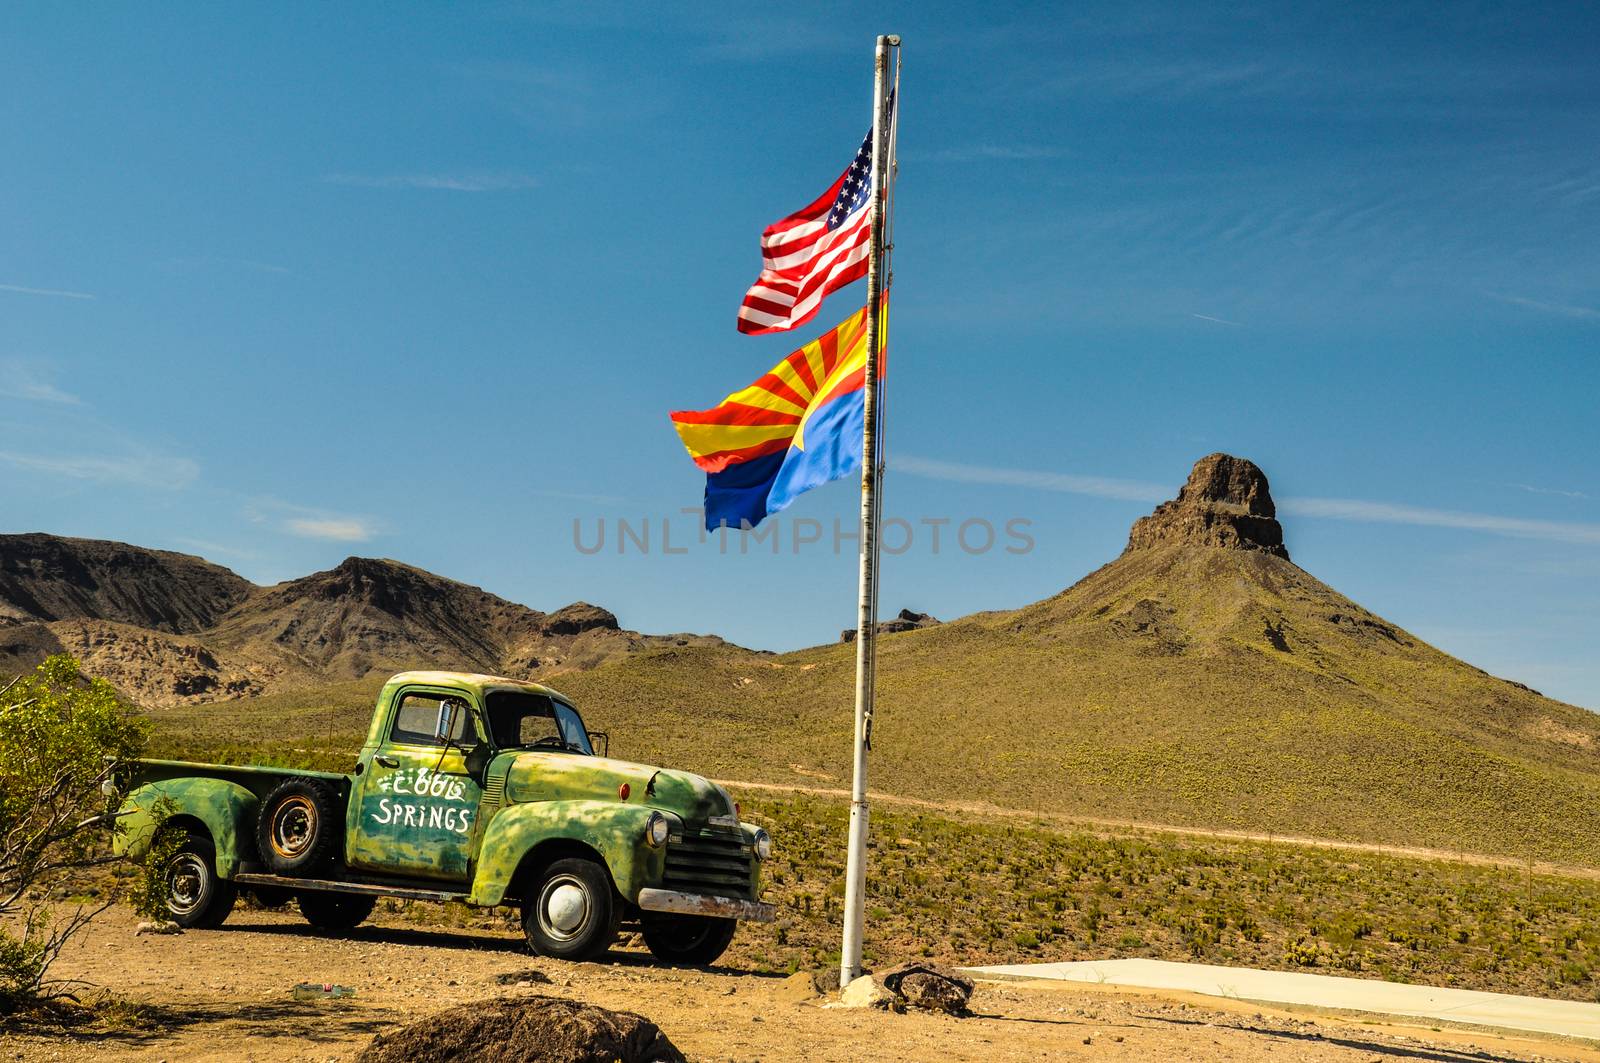 Vintage car in the arizona desert with national and state flags by nickfox